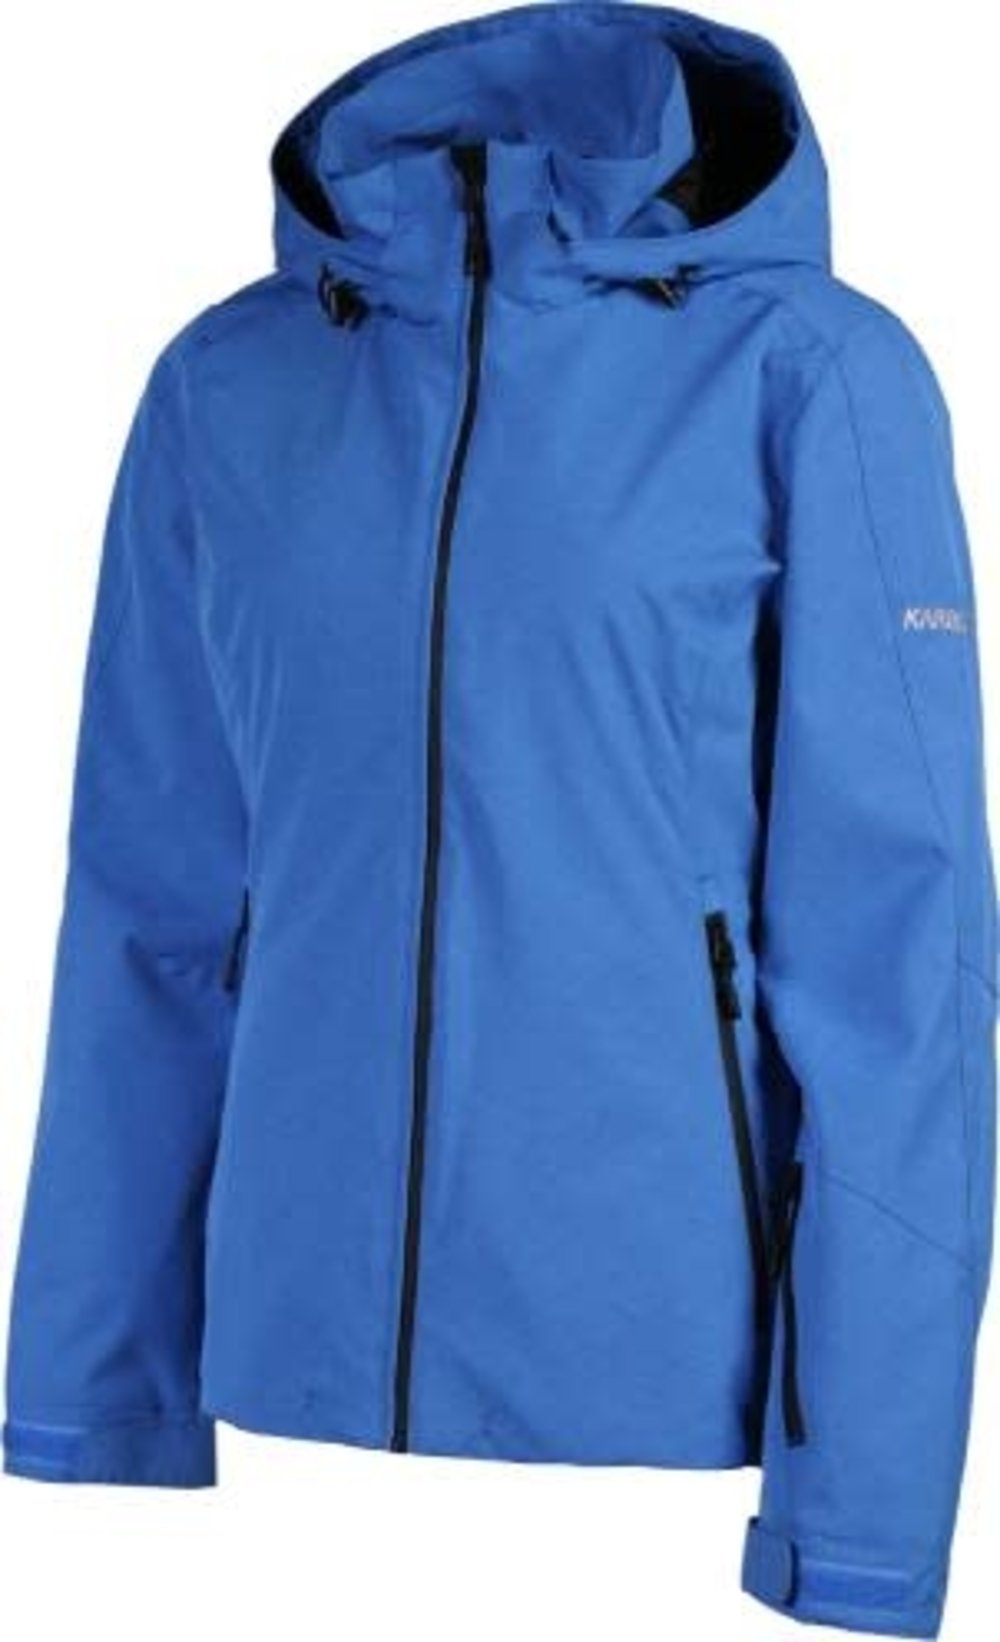 Karbon Constant Ladies Shell Jacket 2020